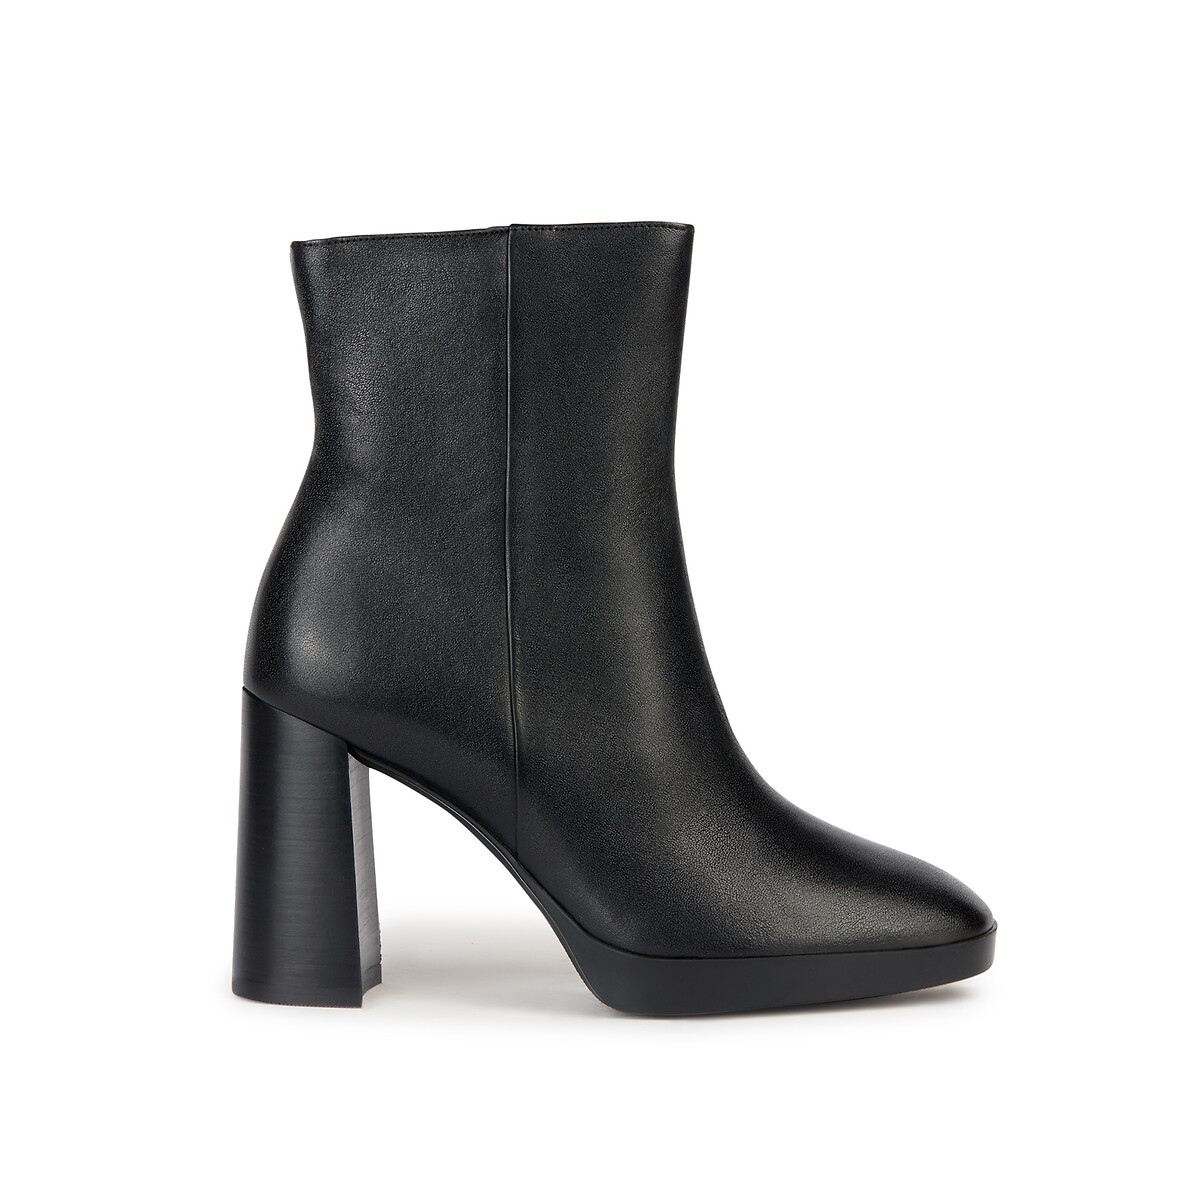 Teulada Heeled Ankle Boots in Breathable Leather